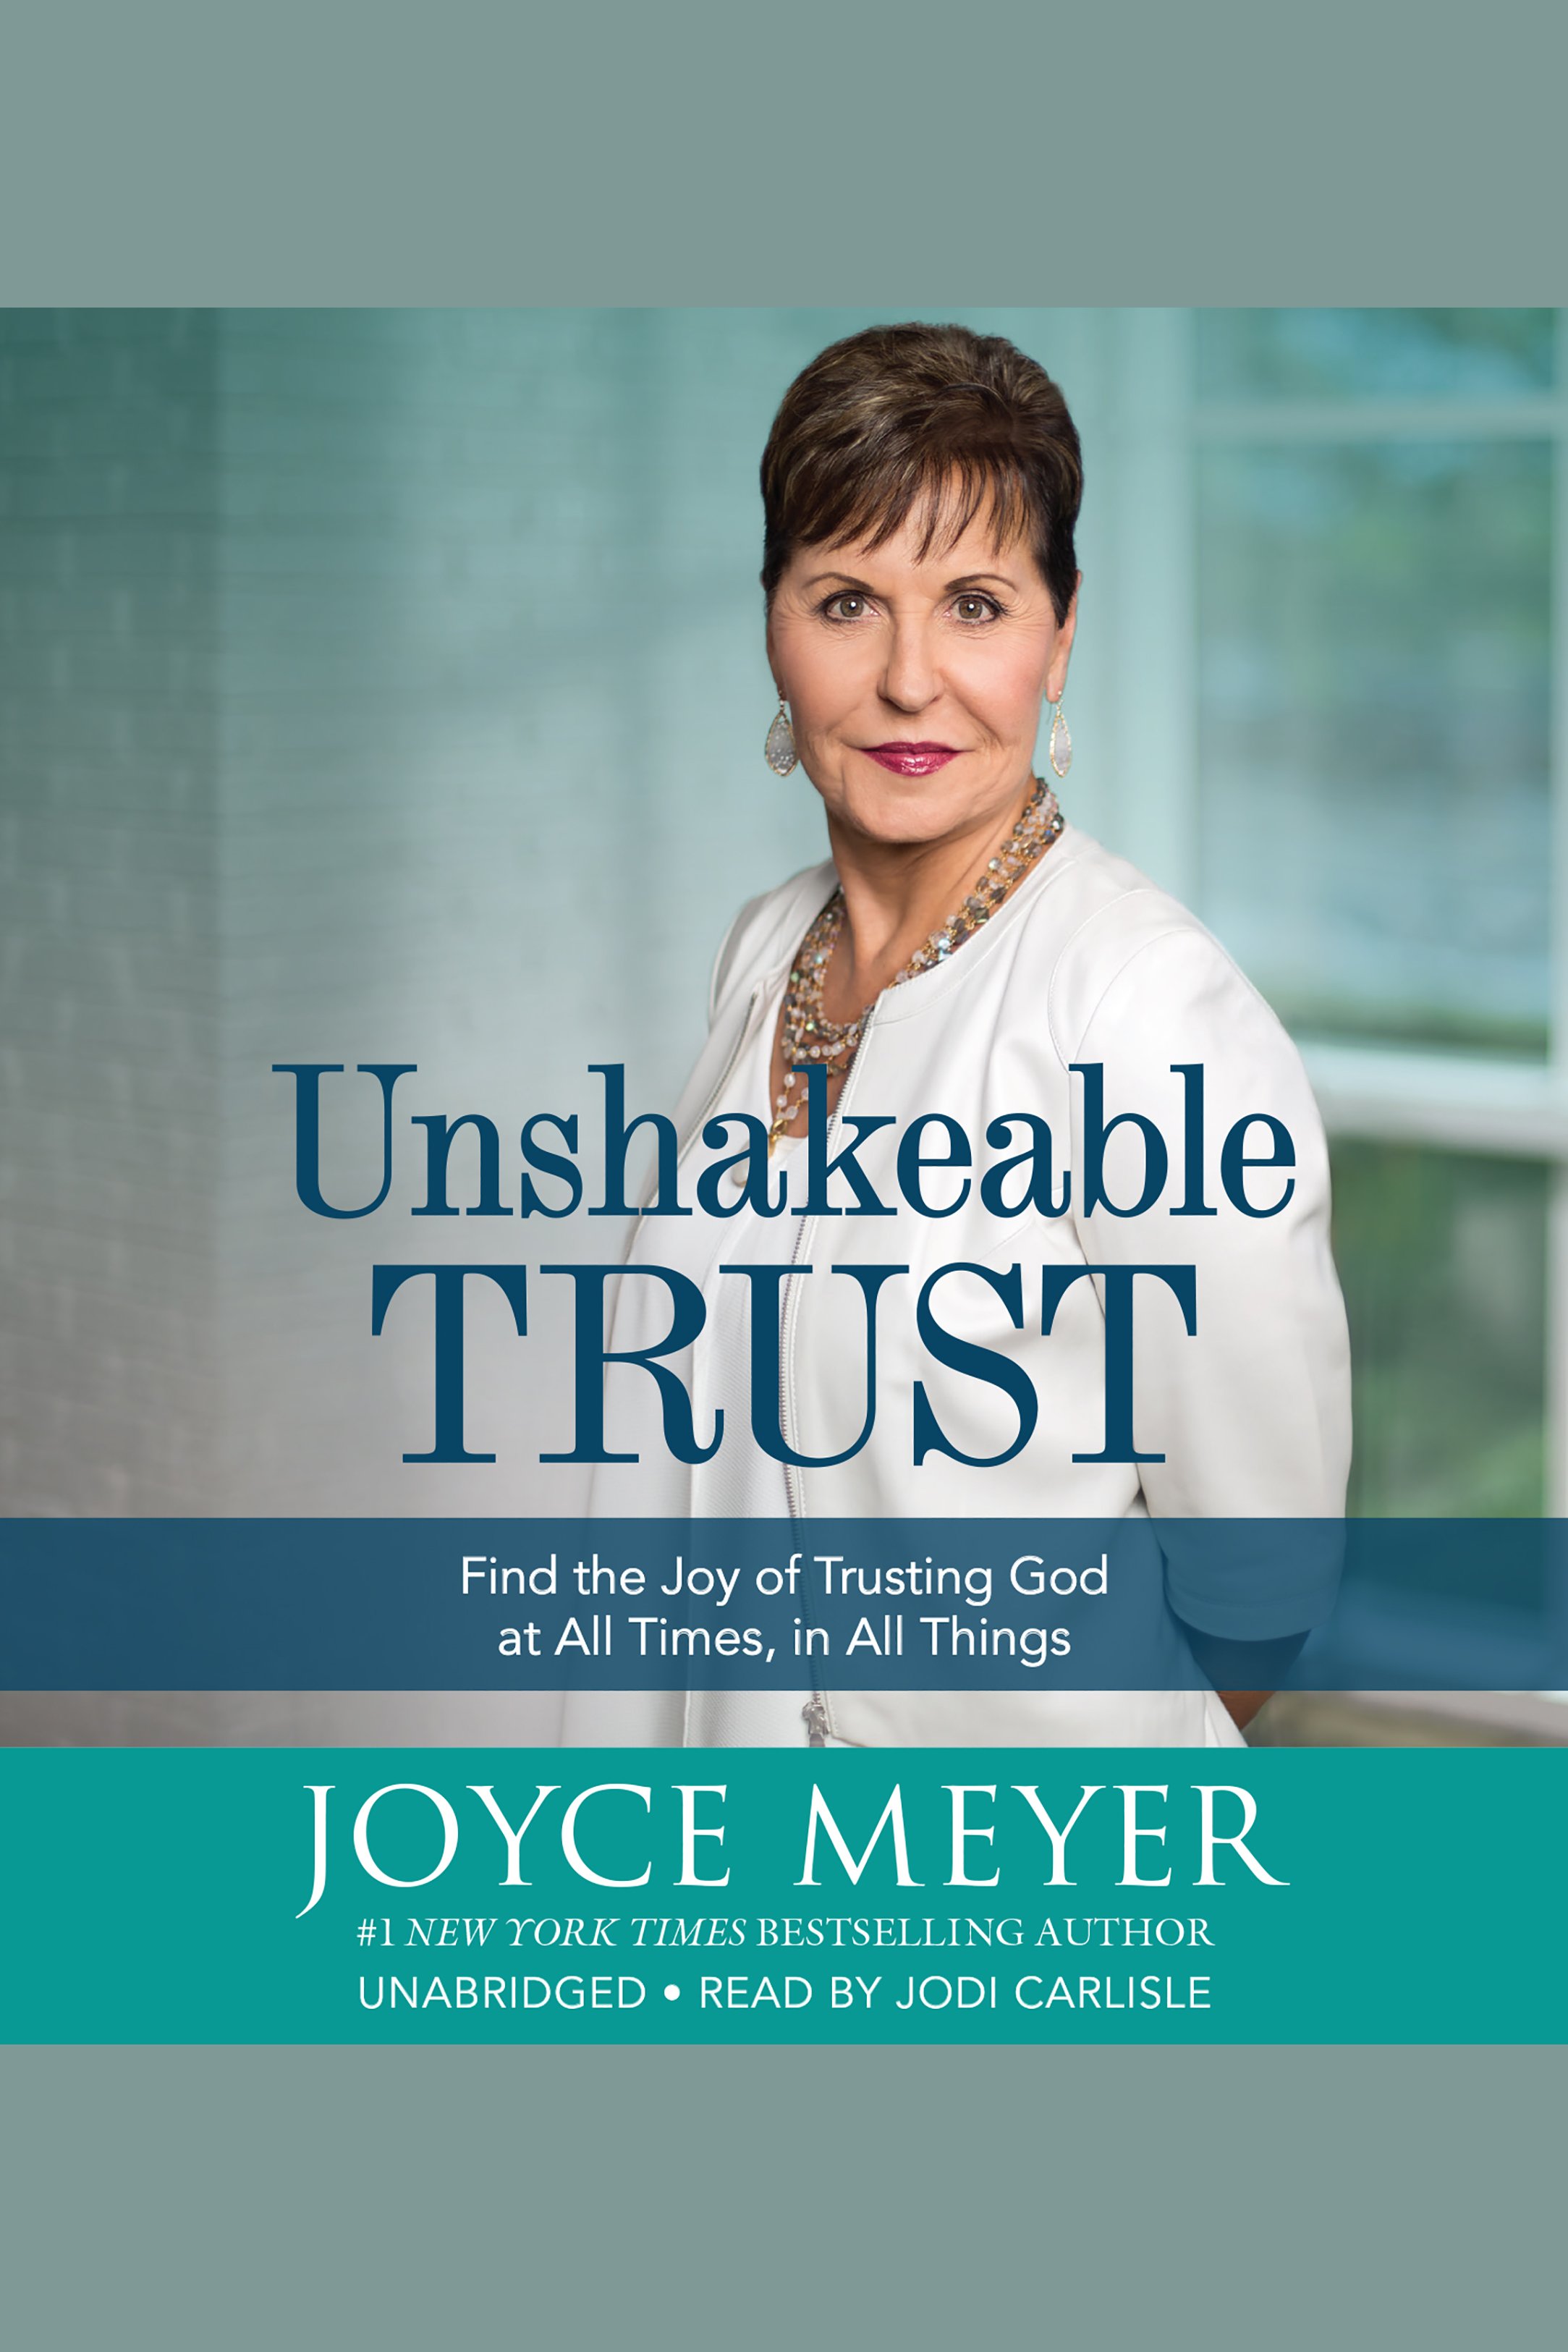 Umschlagbild für Unshakeable Trust [electronic resource] : Find the Joy of Trusting God at All Times, in All Things